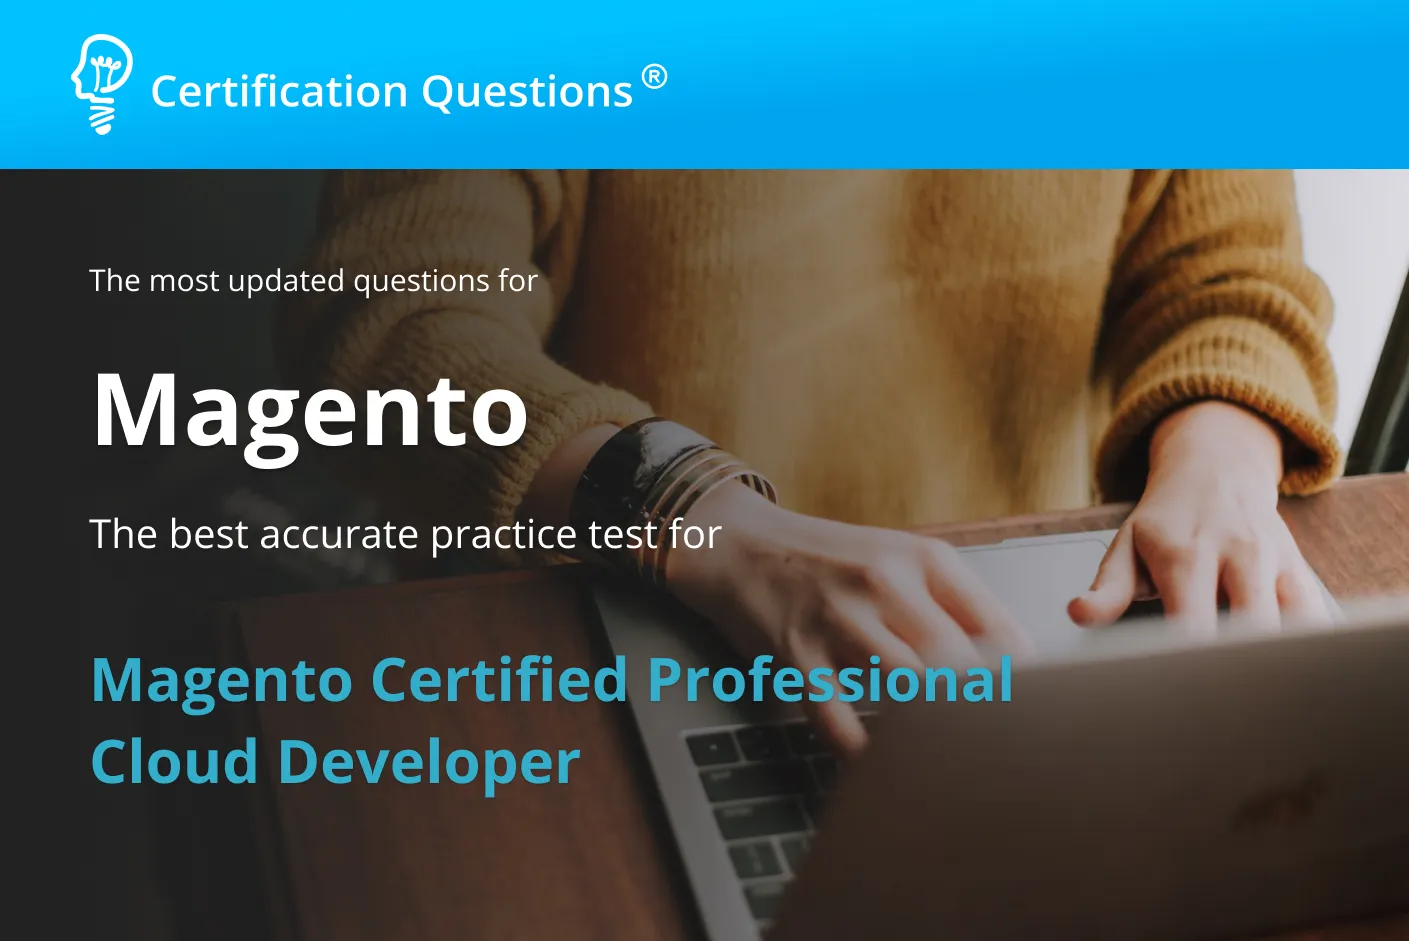 This image is related to Magento Certified Professional Cloud Developer